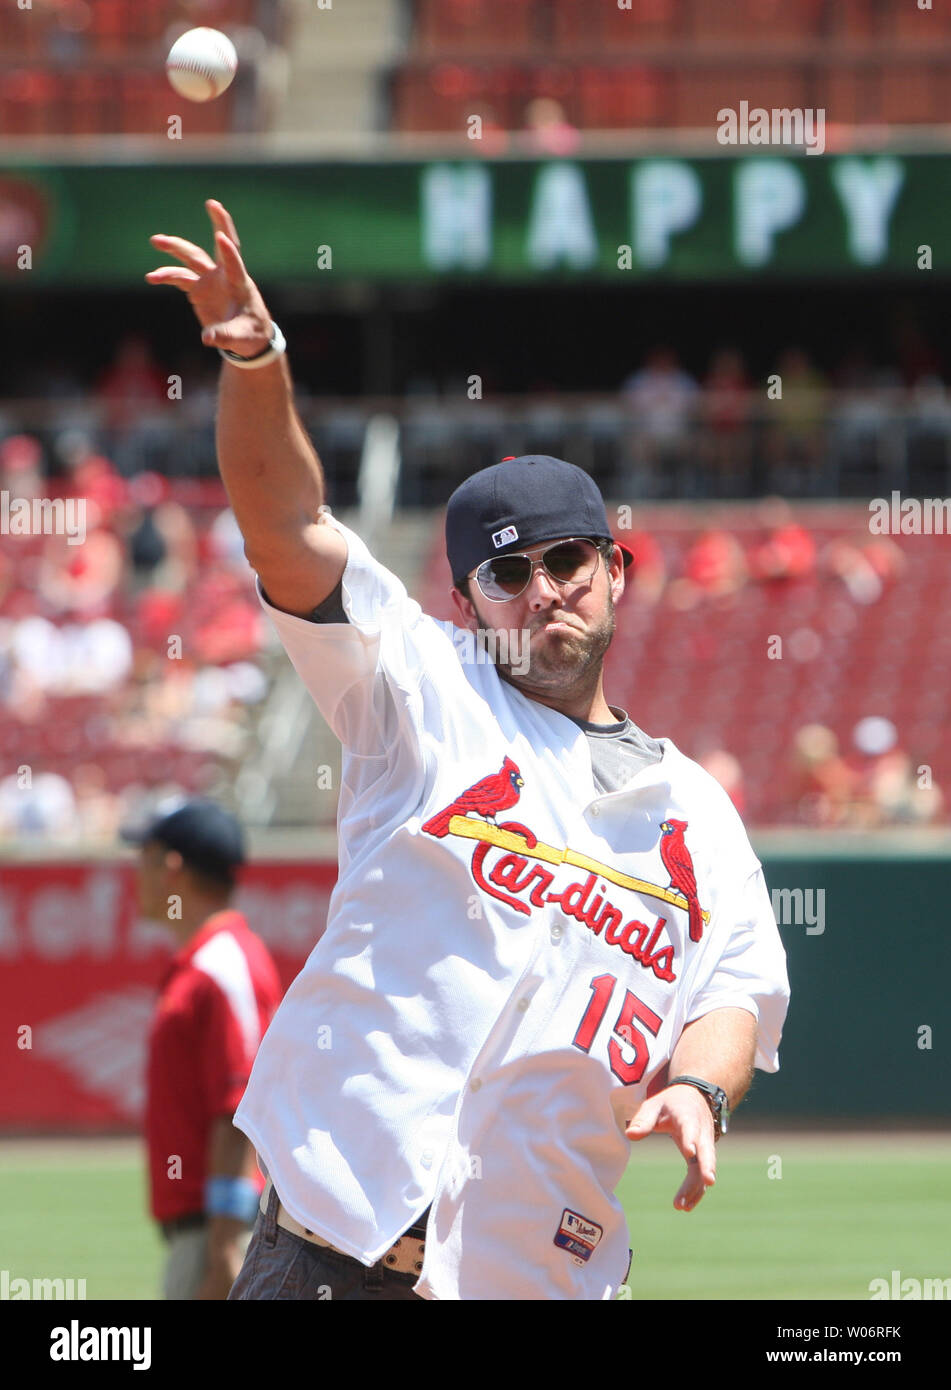 Country music singer David Nail throws a ceremonial first pitch before the Oakland A's -St. Louis Cardinals baseball game at Busch Stadium in St. Louis on June 20, 2010. Nail was recently nominated for Top Single of the Year by the Academy of Country Music for his song, 'Red Light.' UPI/Bill Greenblatt Stock Photo